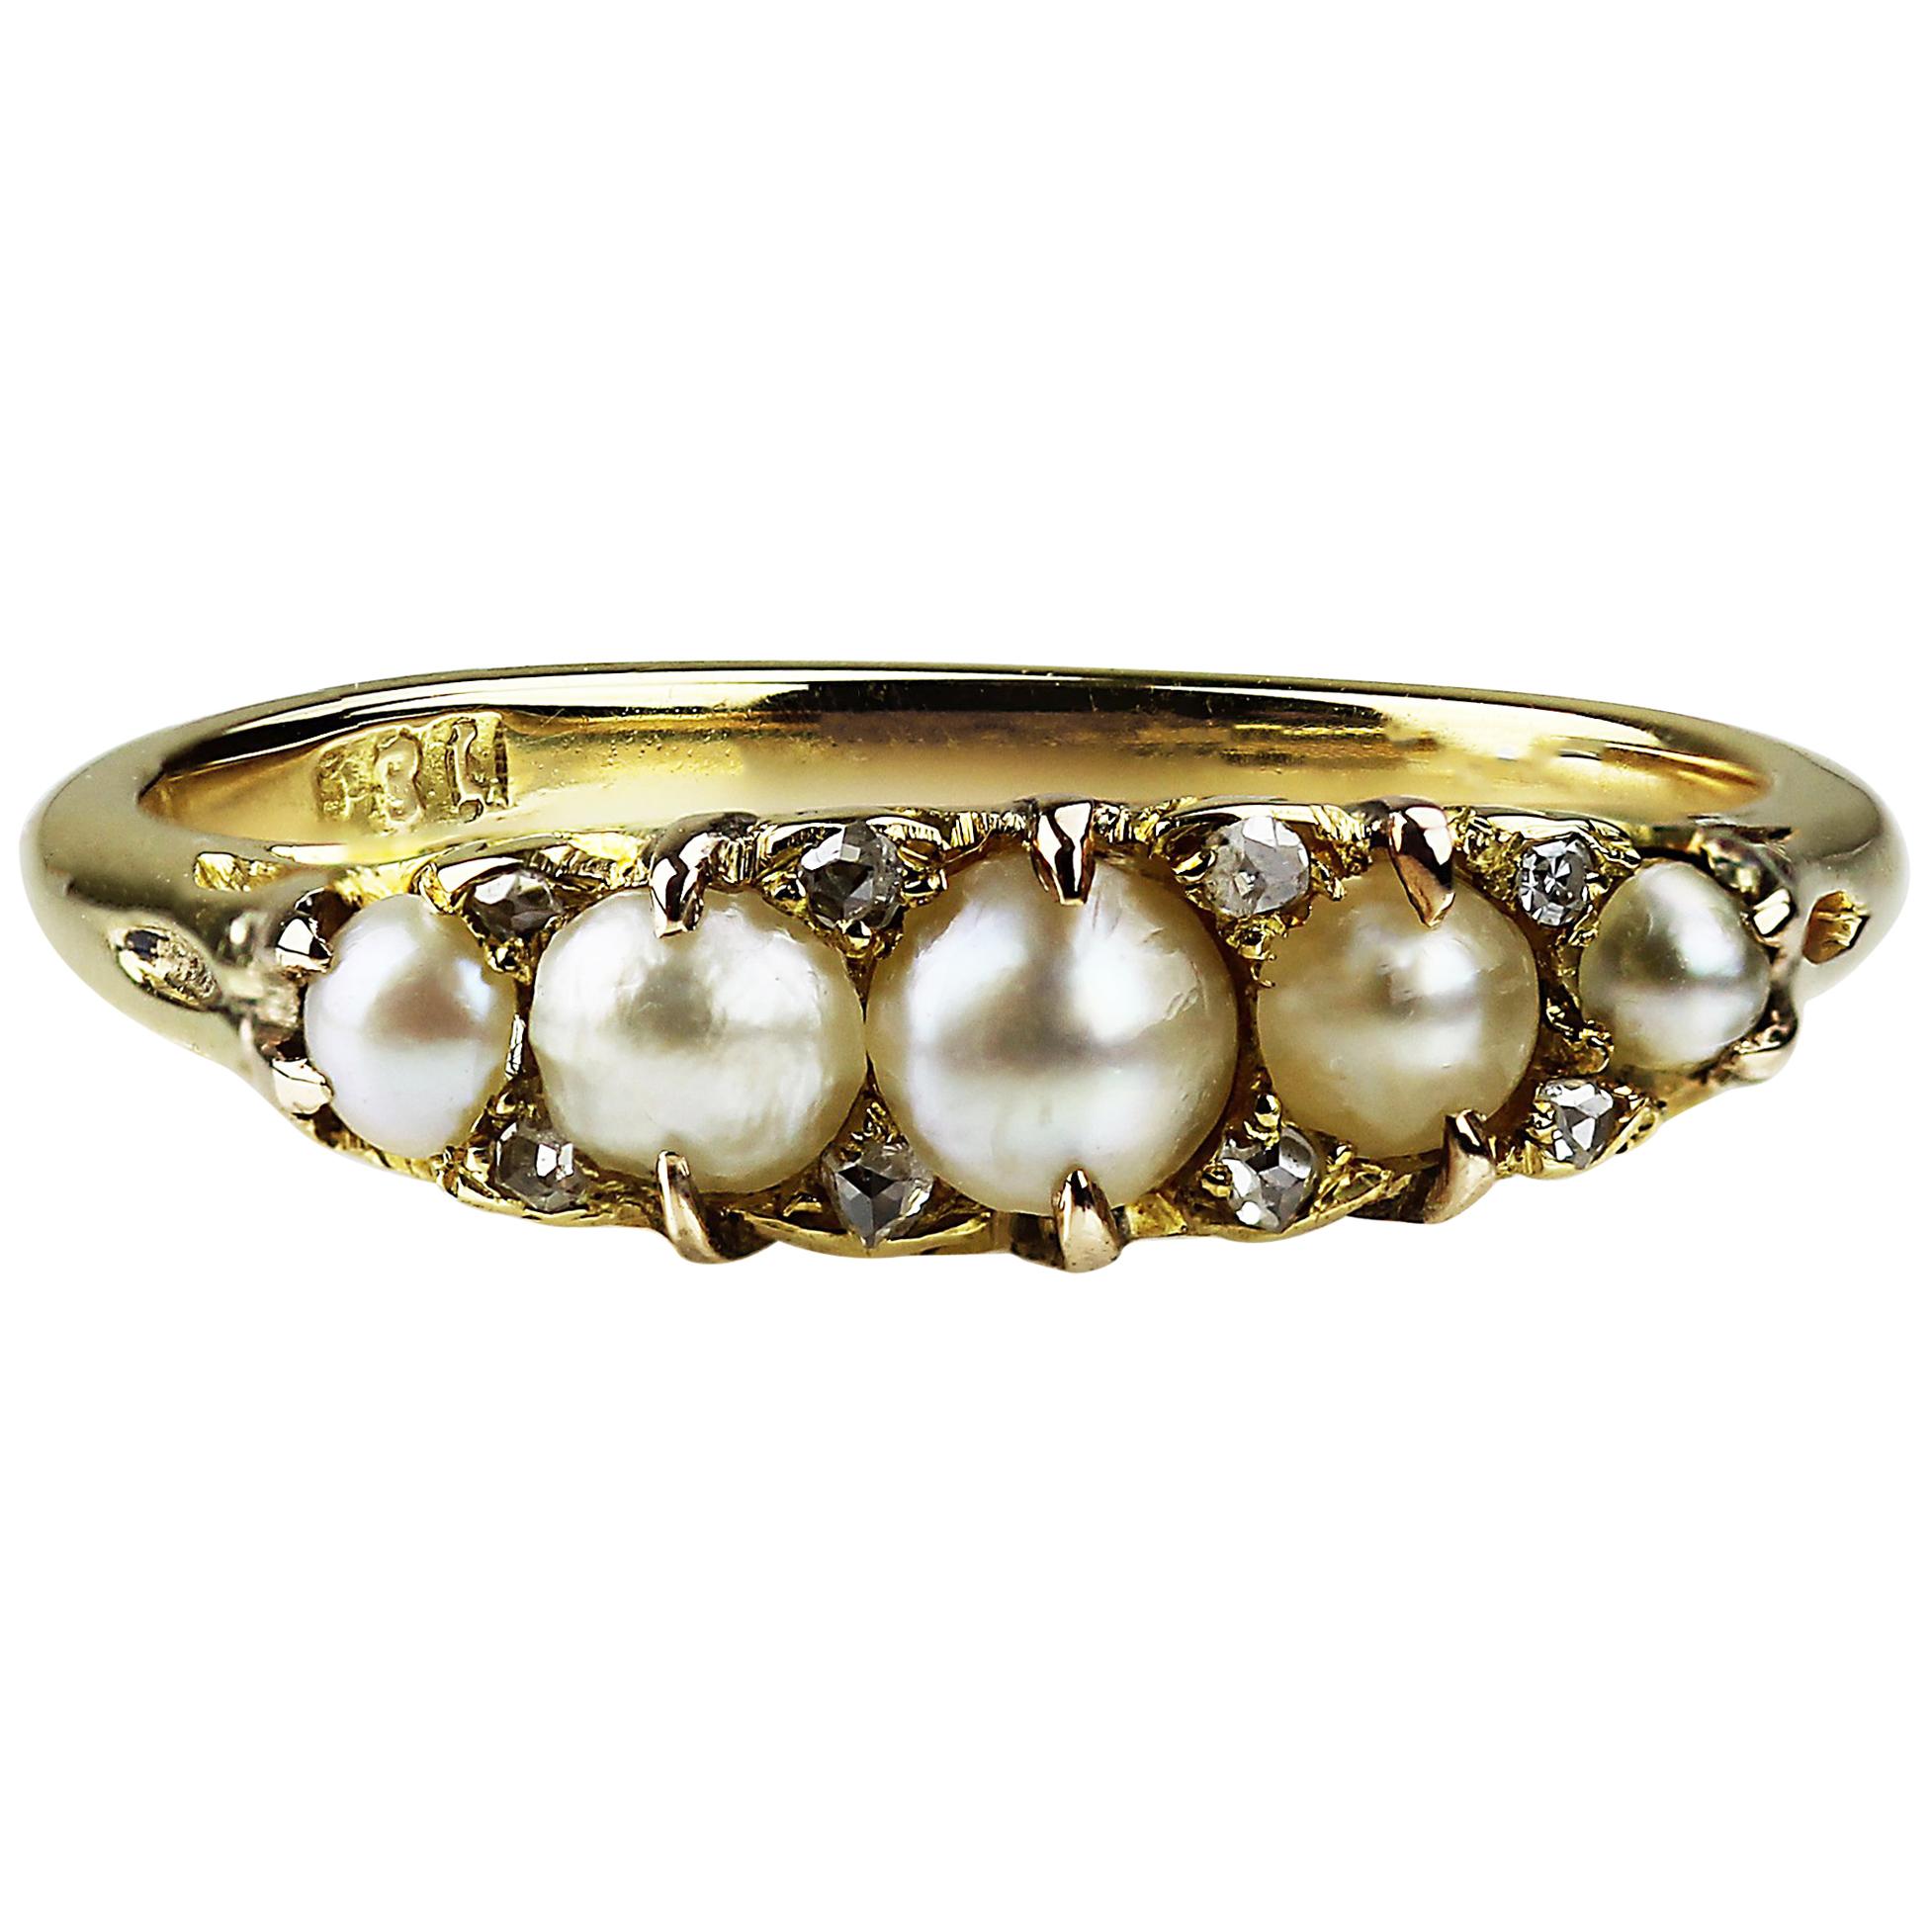 Victoria 1900 Antique Natural Pearl and Rose Cut Diamonds Ring in 18 Carat Gold